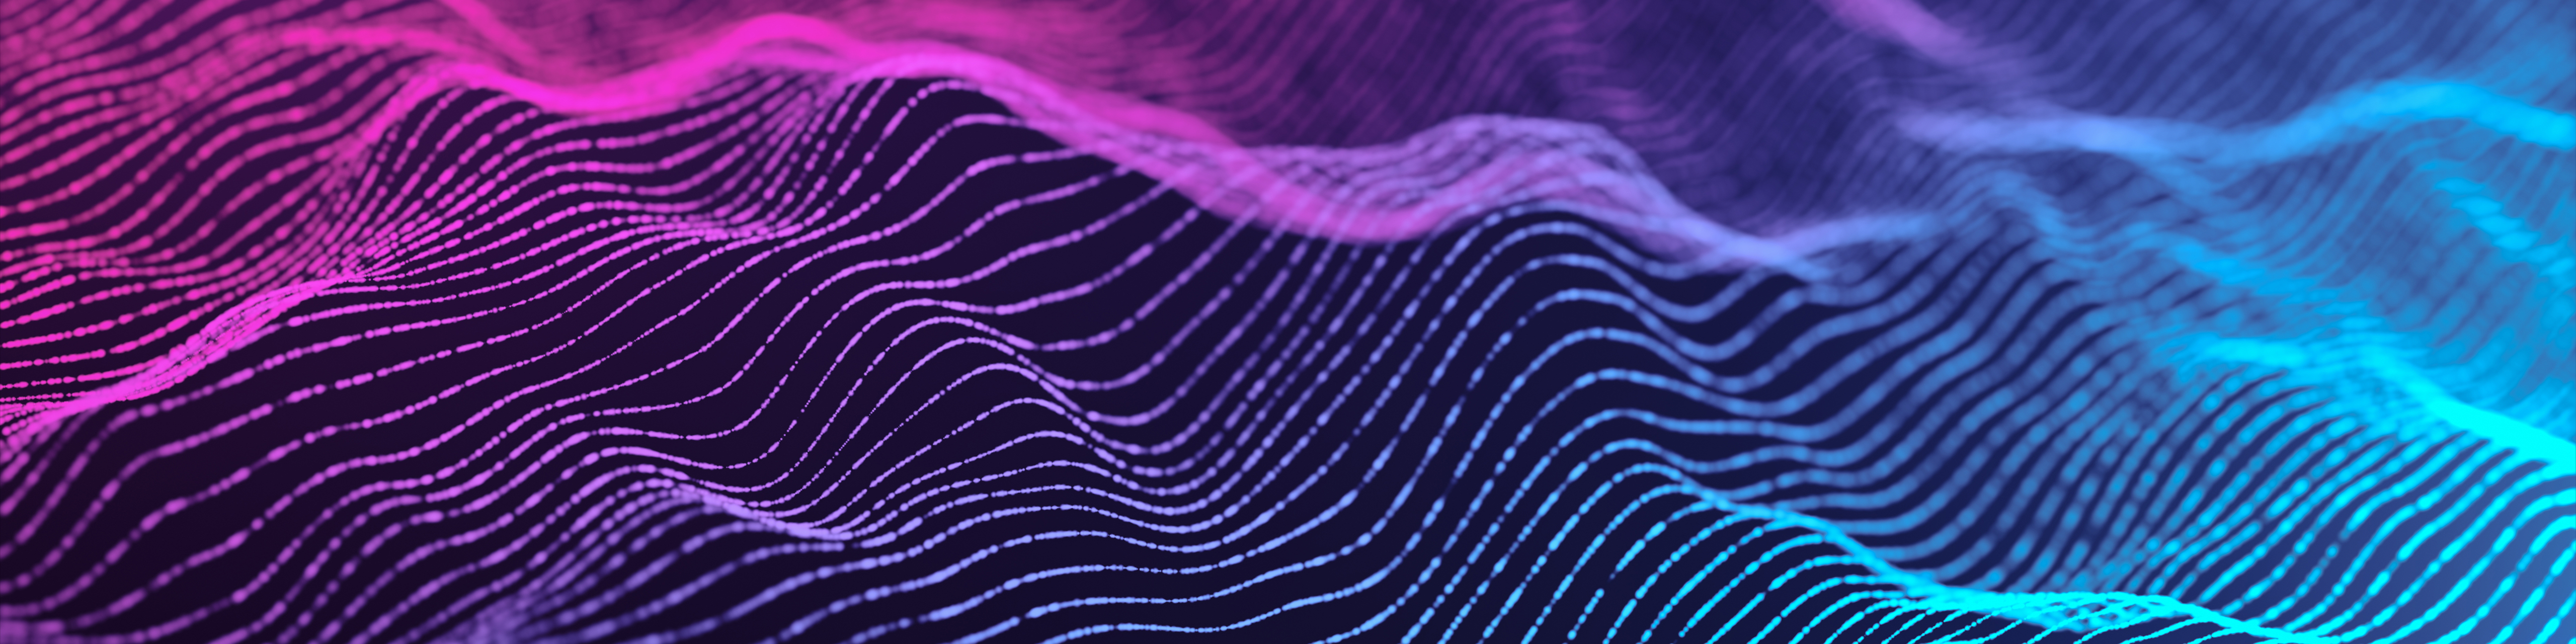 A depiction of sound waves shown in pinks, purples, and blues